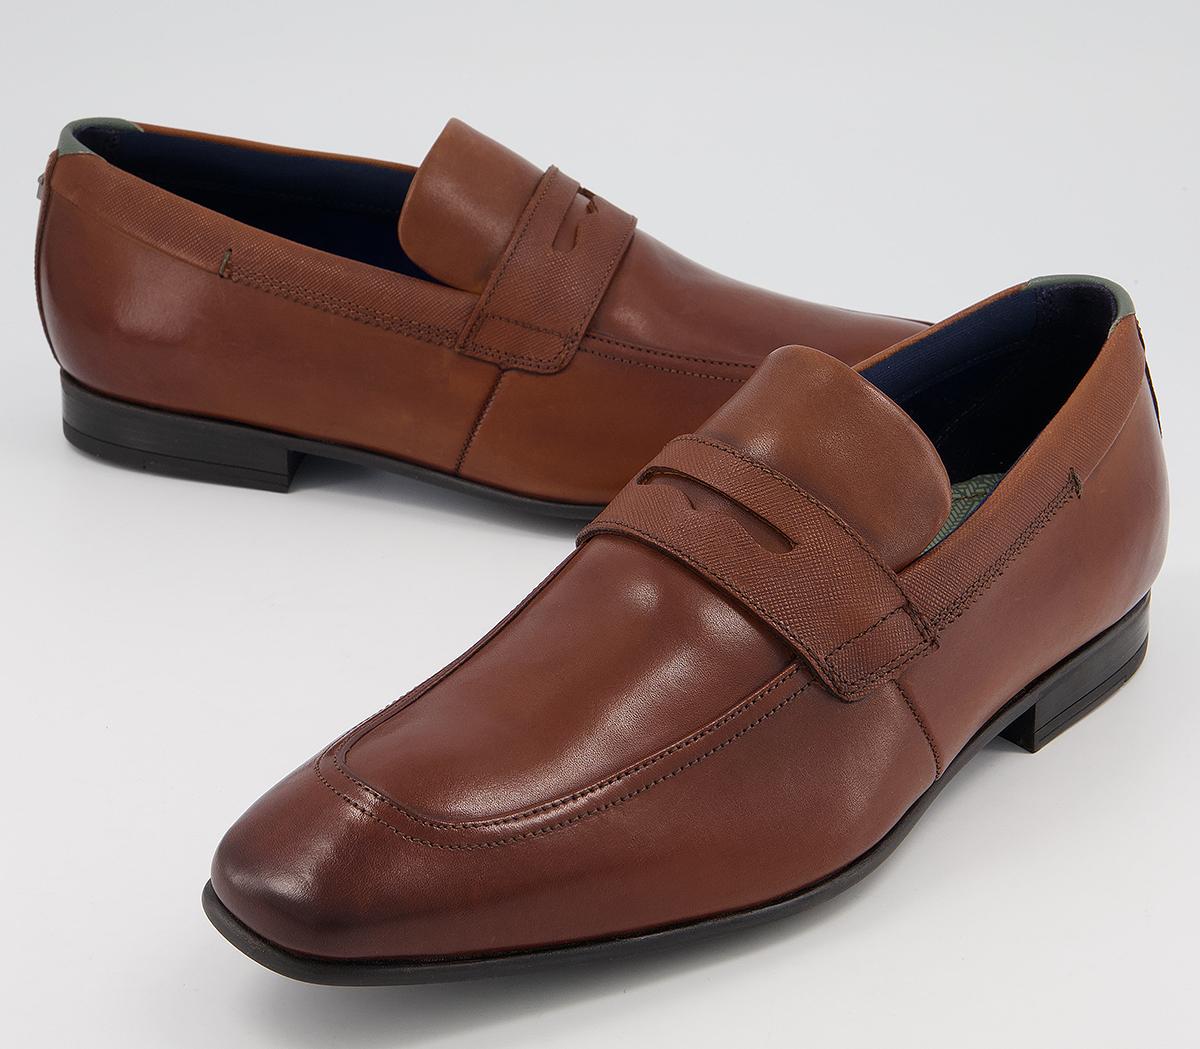 Ted Baker Galle Loafers Tan - Men’s Smart Shoes